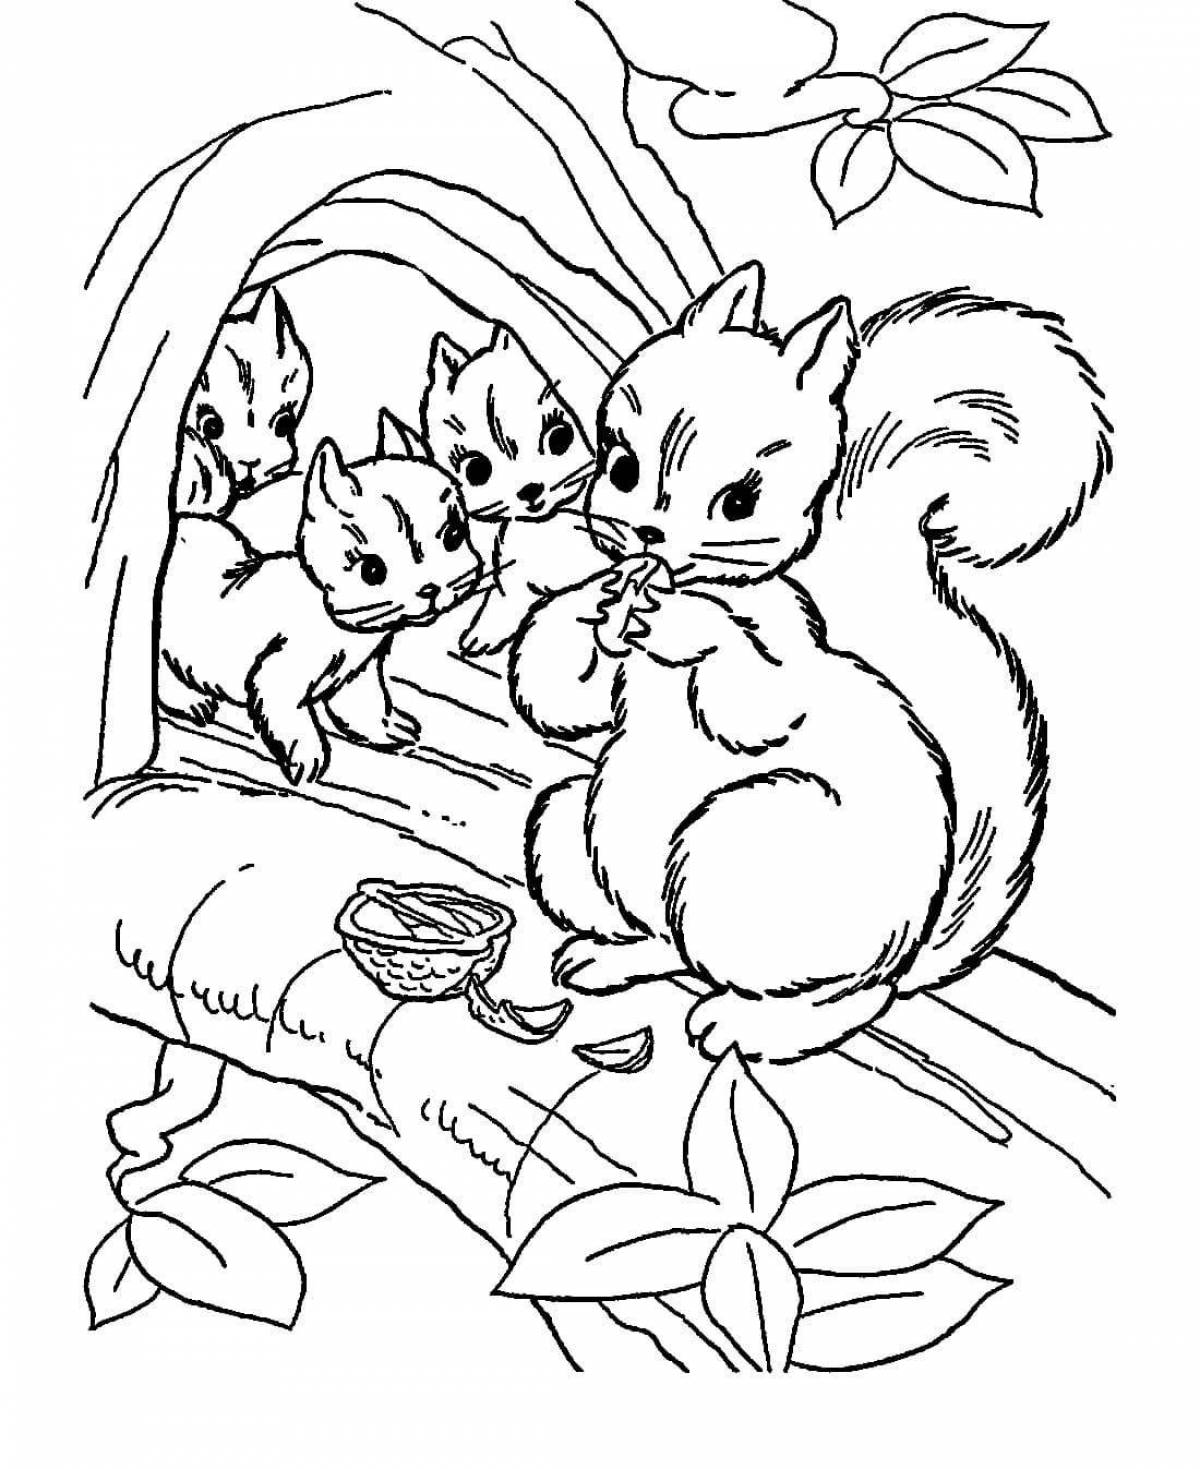 Fun coloring book animals for children 5-6 years old